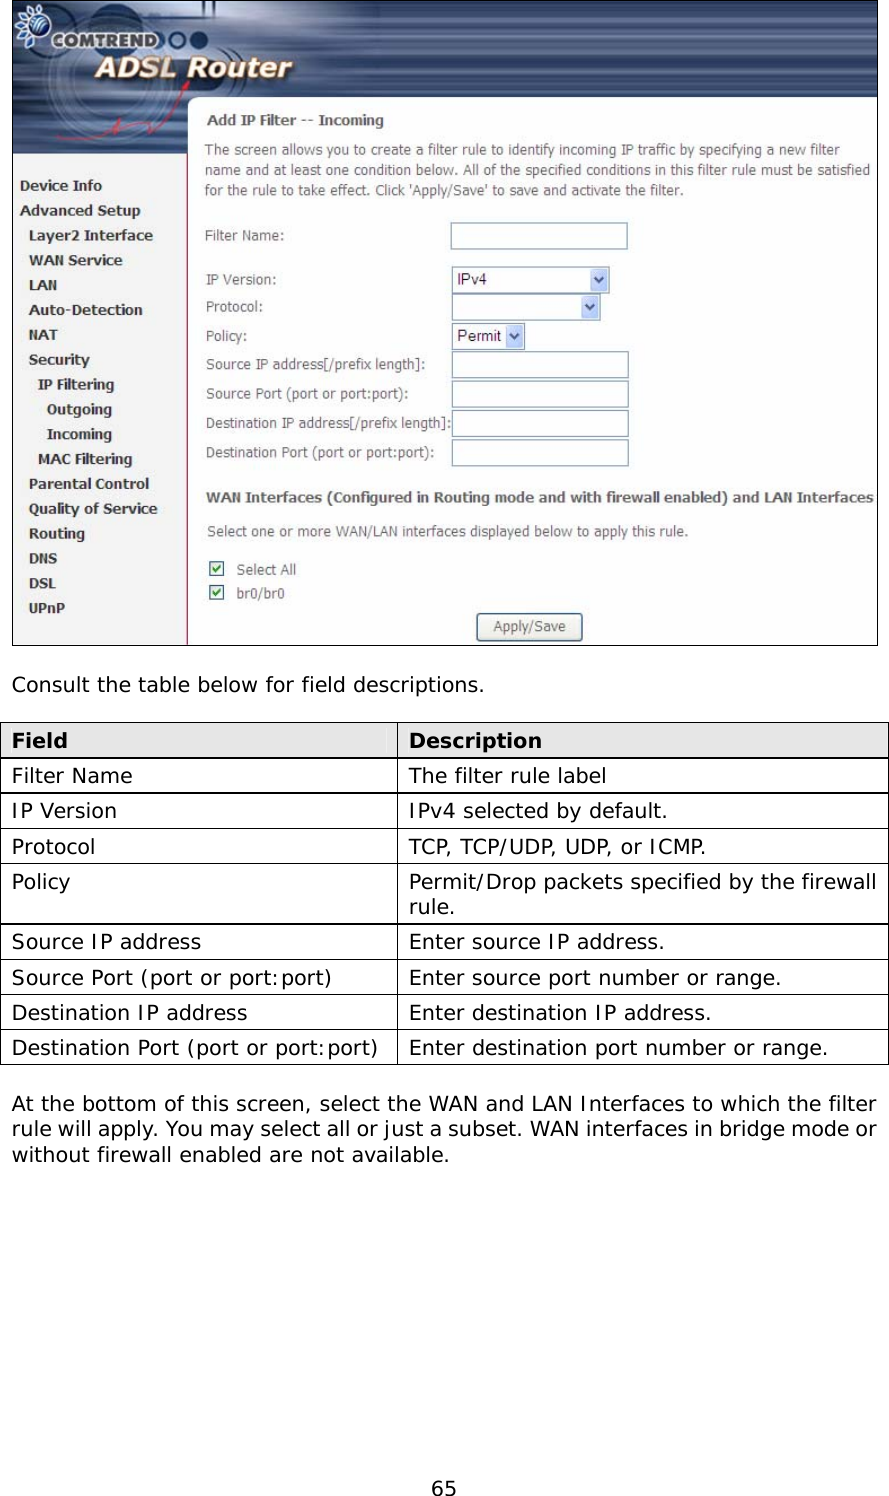  65   Consult the table below for field descriptions.  Field  Description Filter Name  The filter rule label IP Version  IPv4 selected by default. Protocol  TCP, TCP/UDP, UDP, or ICMP. Policy  Permit/Drop packets specified by the firewall rule. Source IP address  Enter source IP address. Source Port (port or port:port)  Enter source port number or range. Destination IP address  Enter destination IP address. Destination Port (port or port:port) Enter destination port number or range.  At the bottom of this screen, select the WAN and LAN Interfaces to which the filter rule will apply. You may select all or just a subset. WAN interfaces in bridge mode or without firewall enabled are not available. 